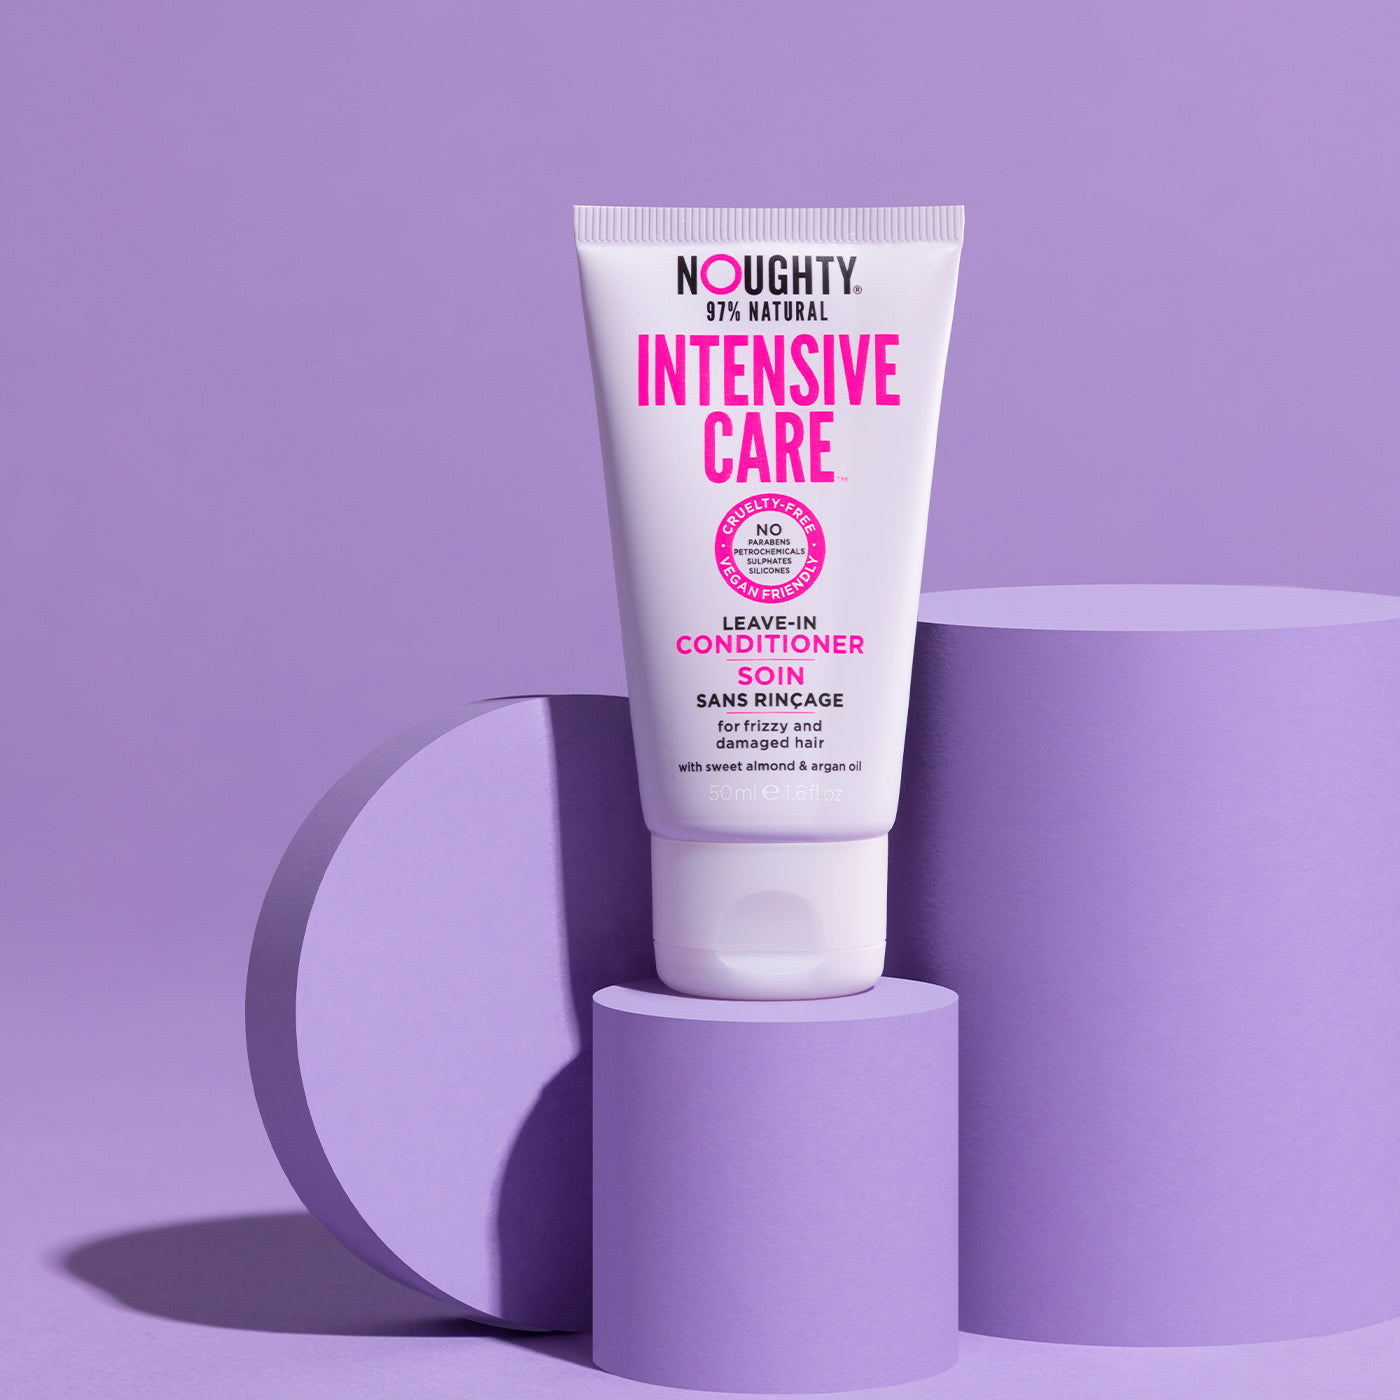 Noughty Intensive Care leave in conditioning cream for dry and damaged, frizzy hair. Natural haircare vegan cruelty free natural sulphate free paraben free